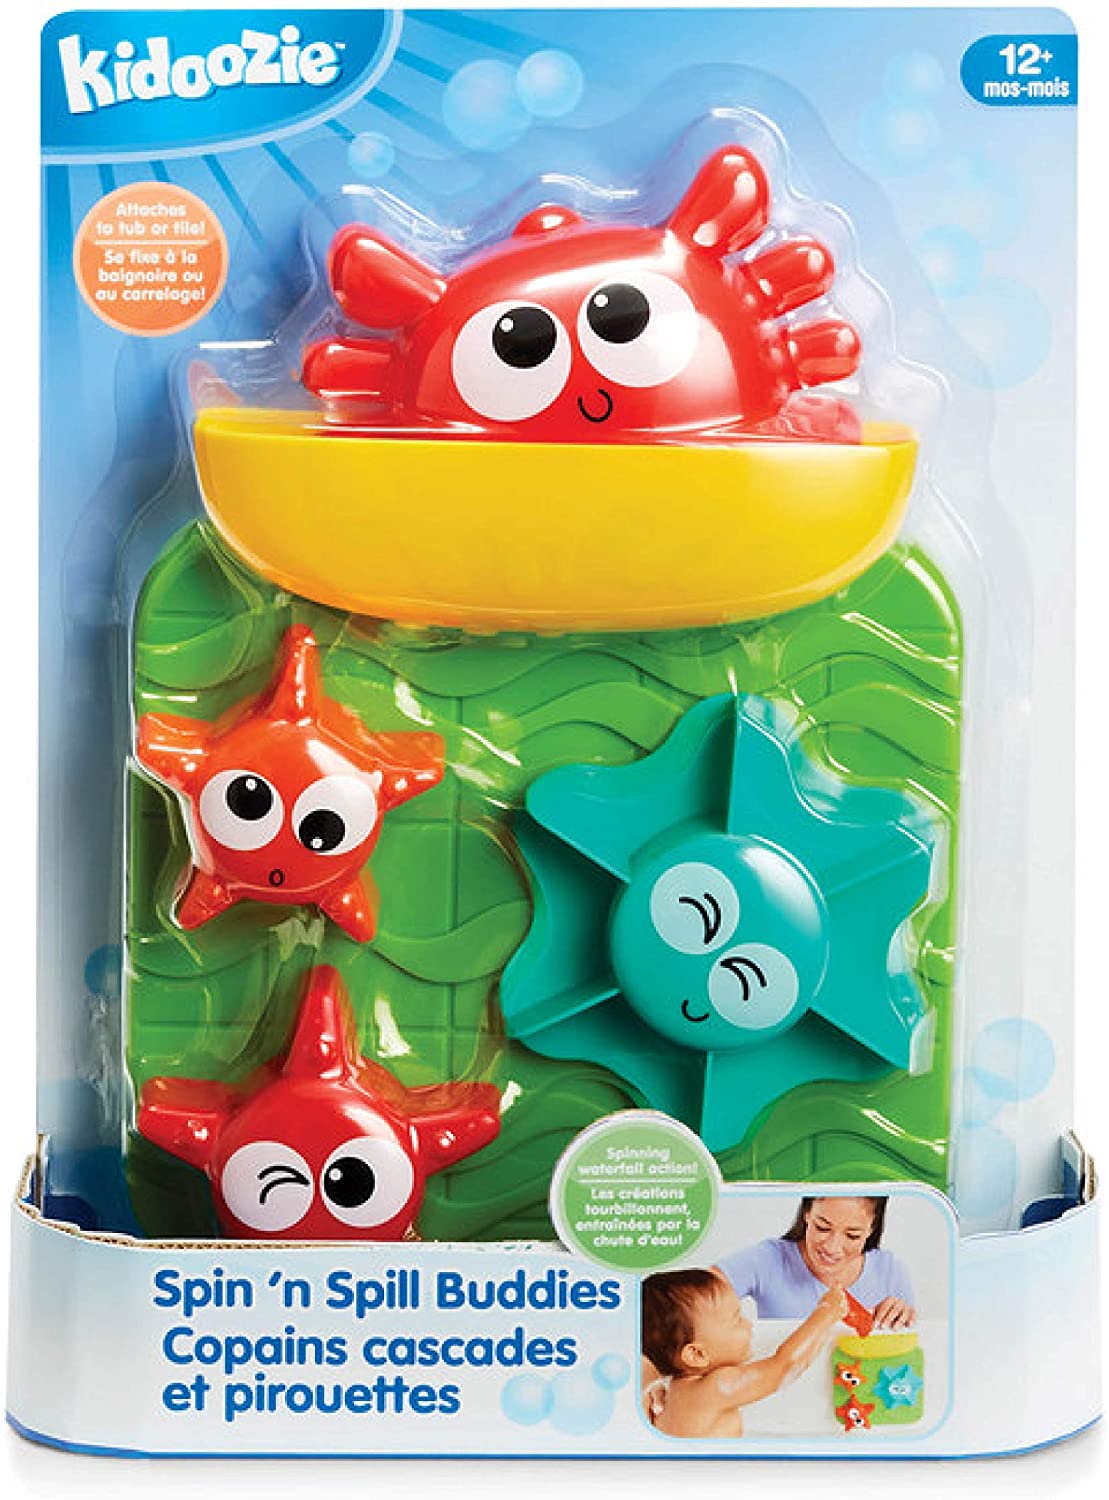 Spin n Spill Buddies - Ages 12m+